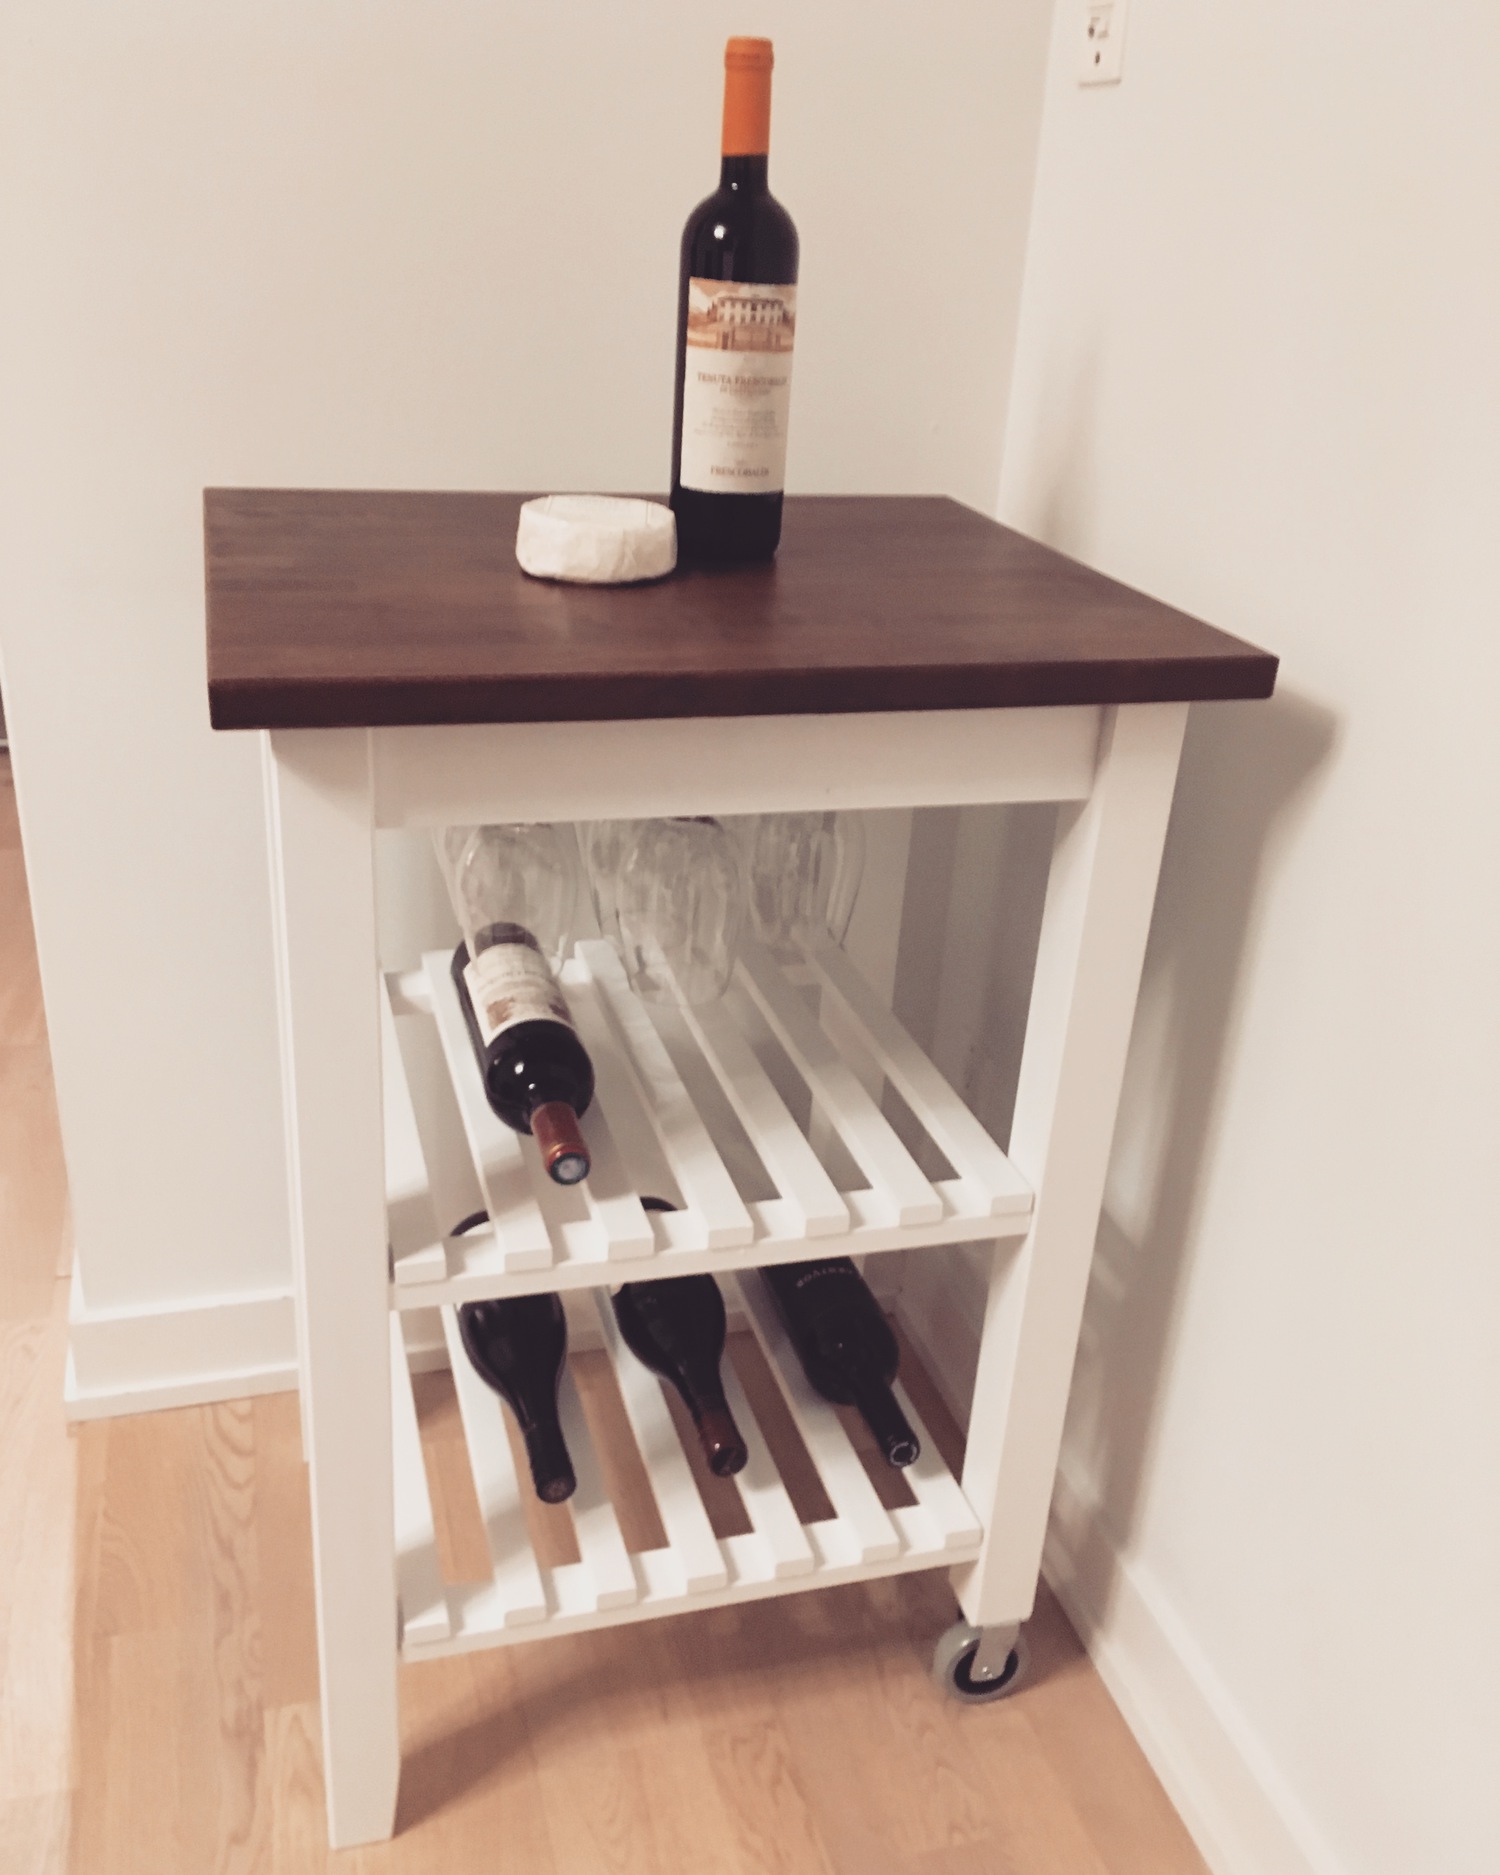 Finished version of my DIY wine cart